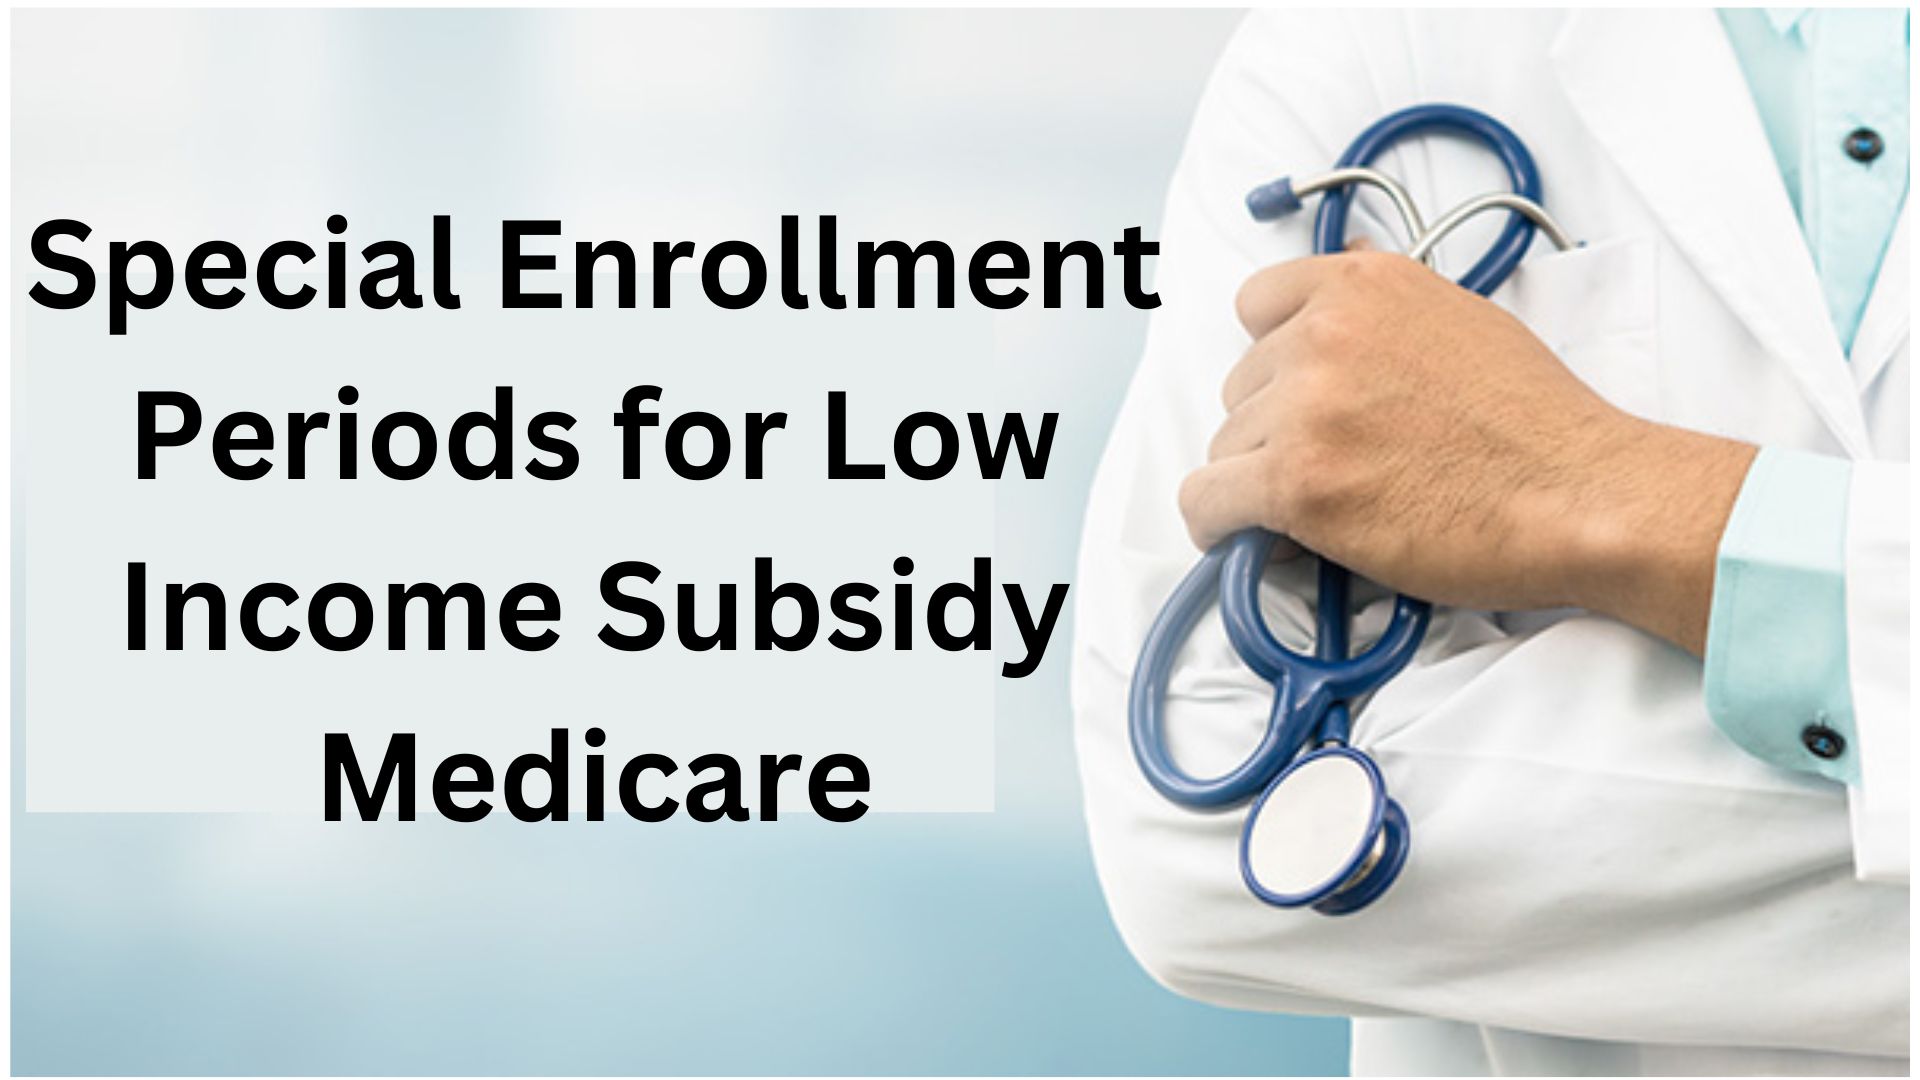 Special Enrollment Periods for Low Income Subsidy Medicare